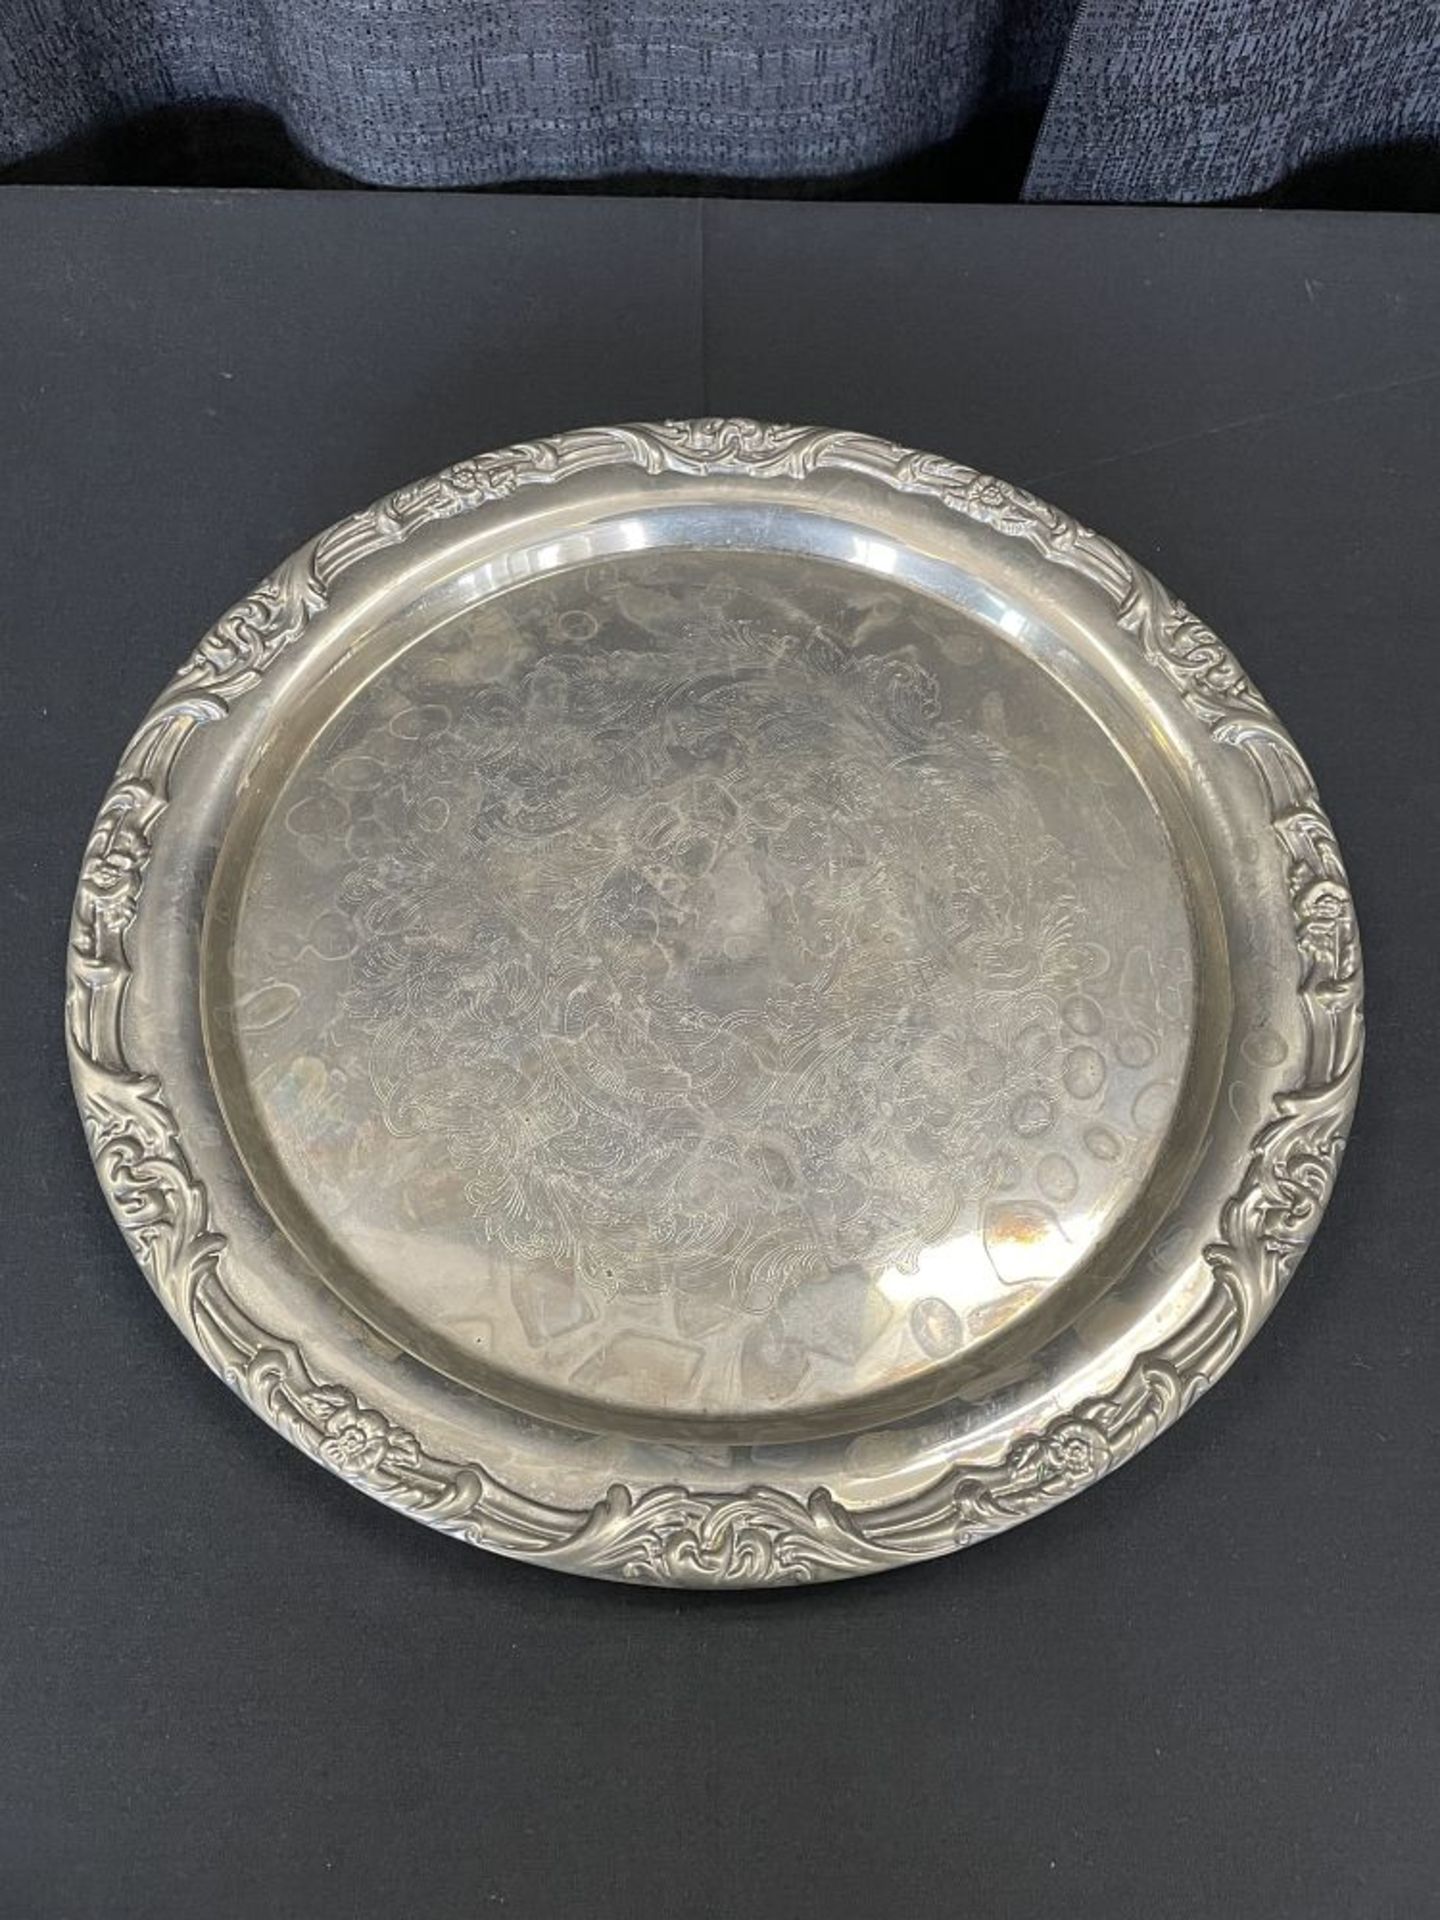 16.75" Round Silver Plate Serving Tray w/ Ornate Edge